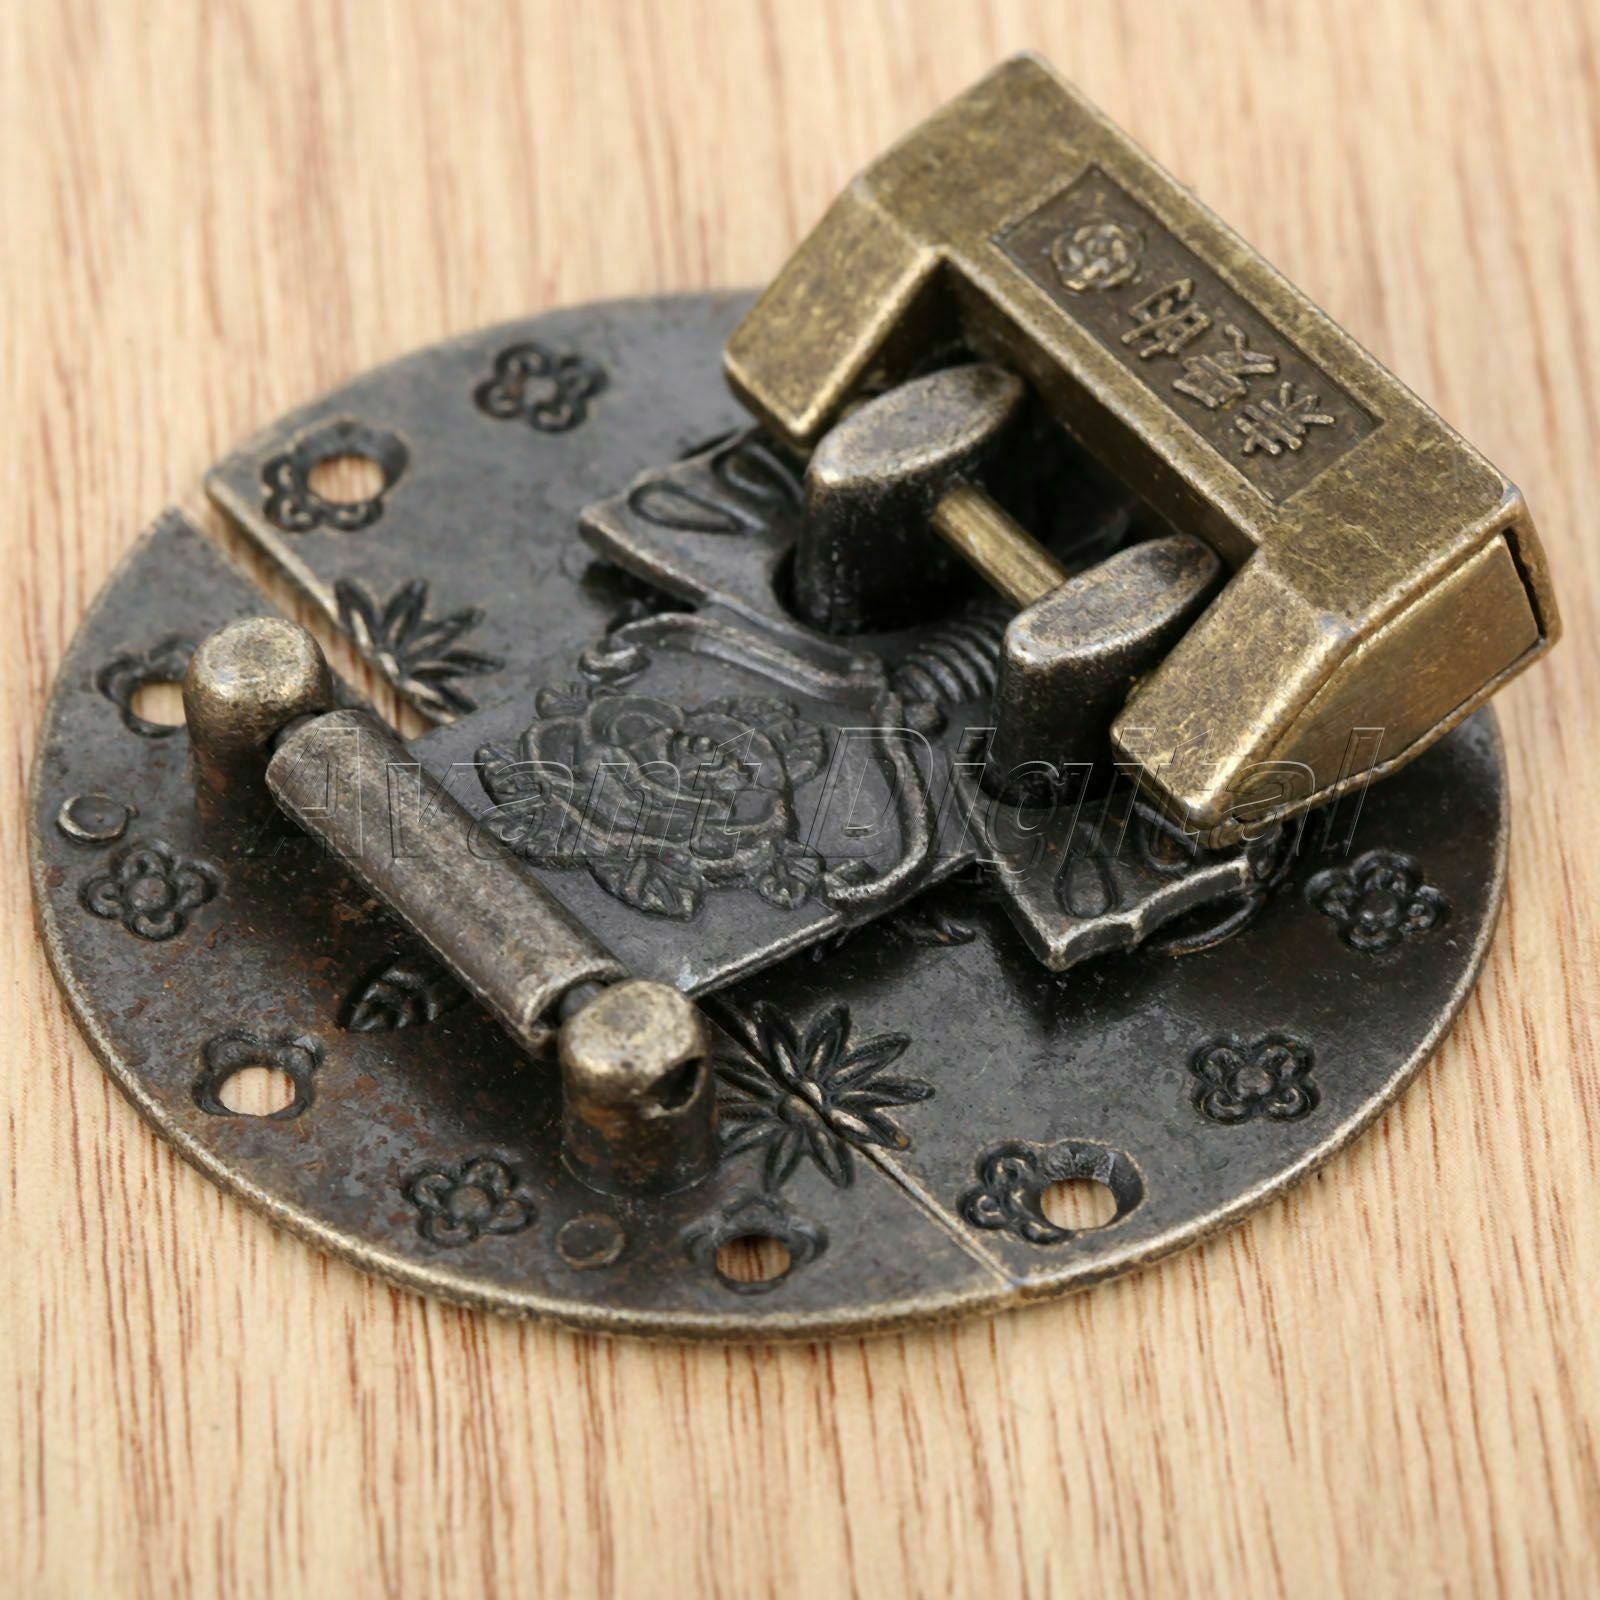 1Set Padlock Chinese Jewelry Box Lock Retro Carved Butterfly Suitcase Latch Hasp